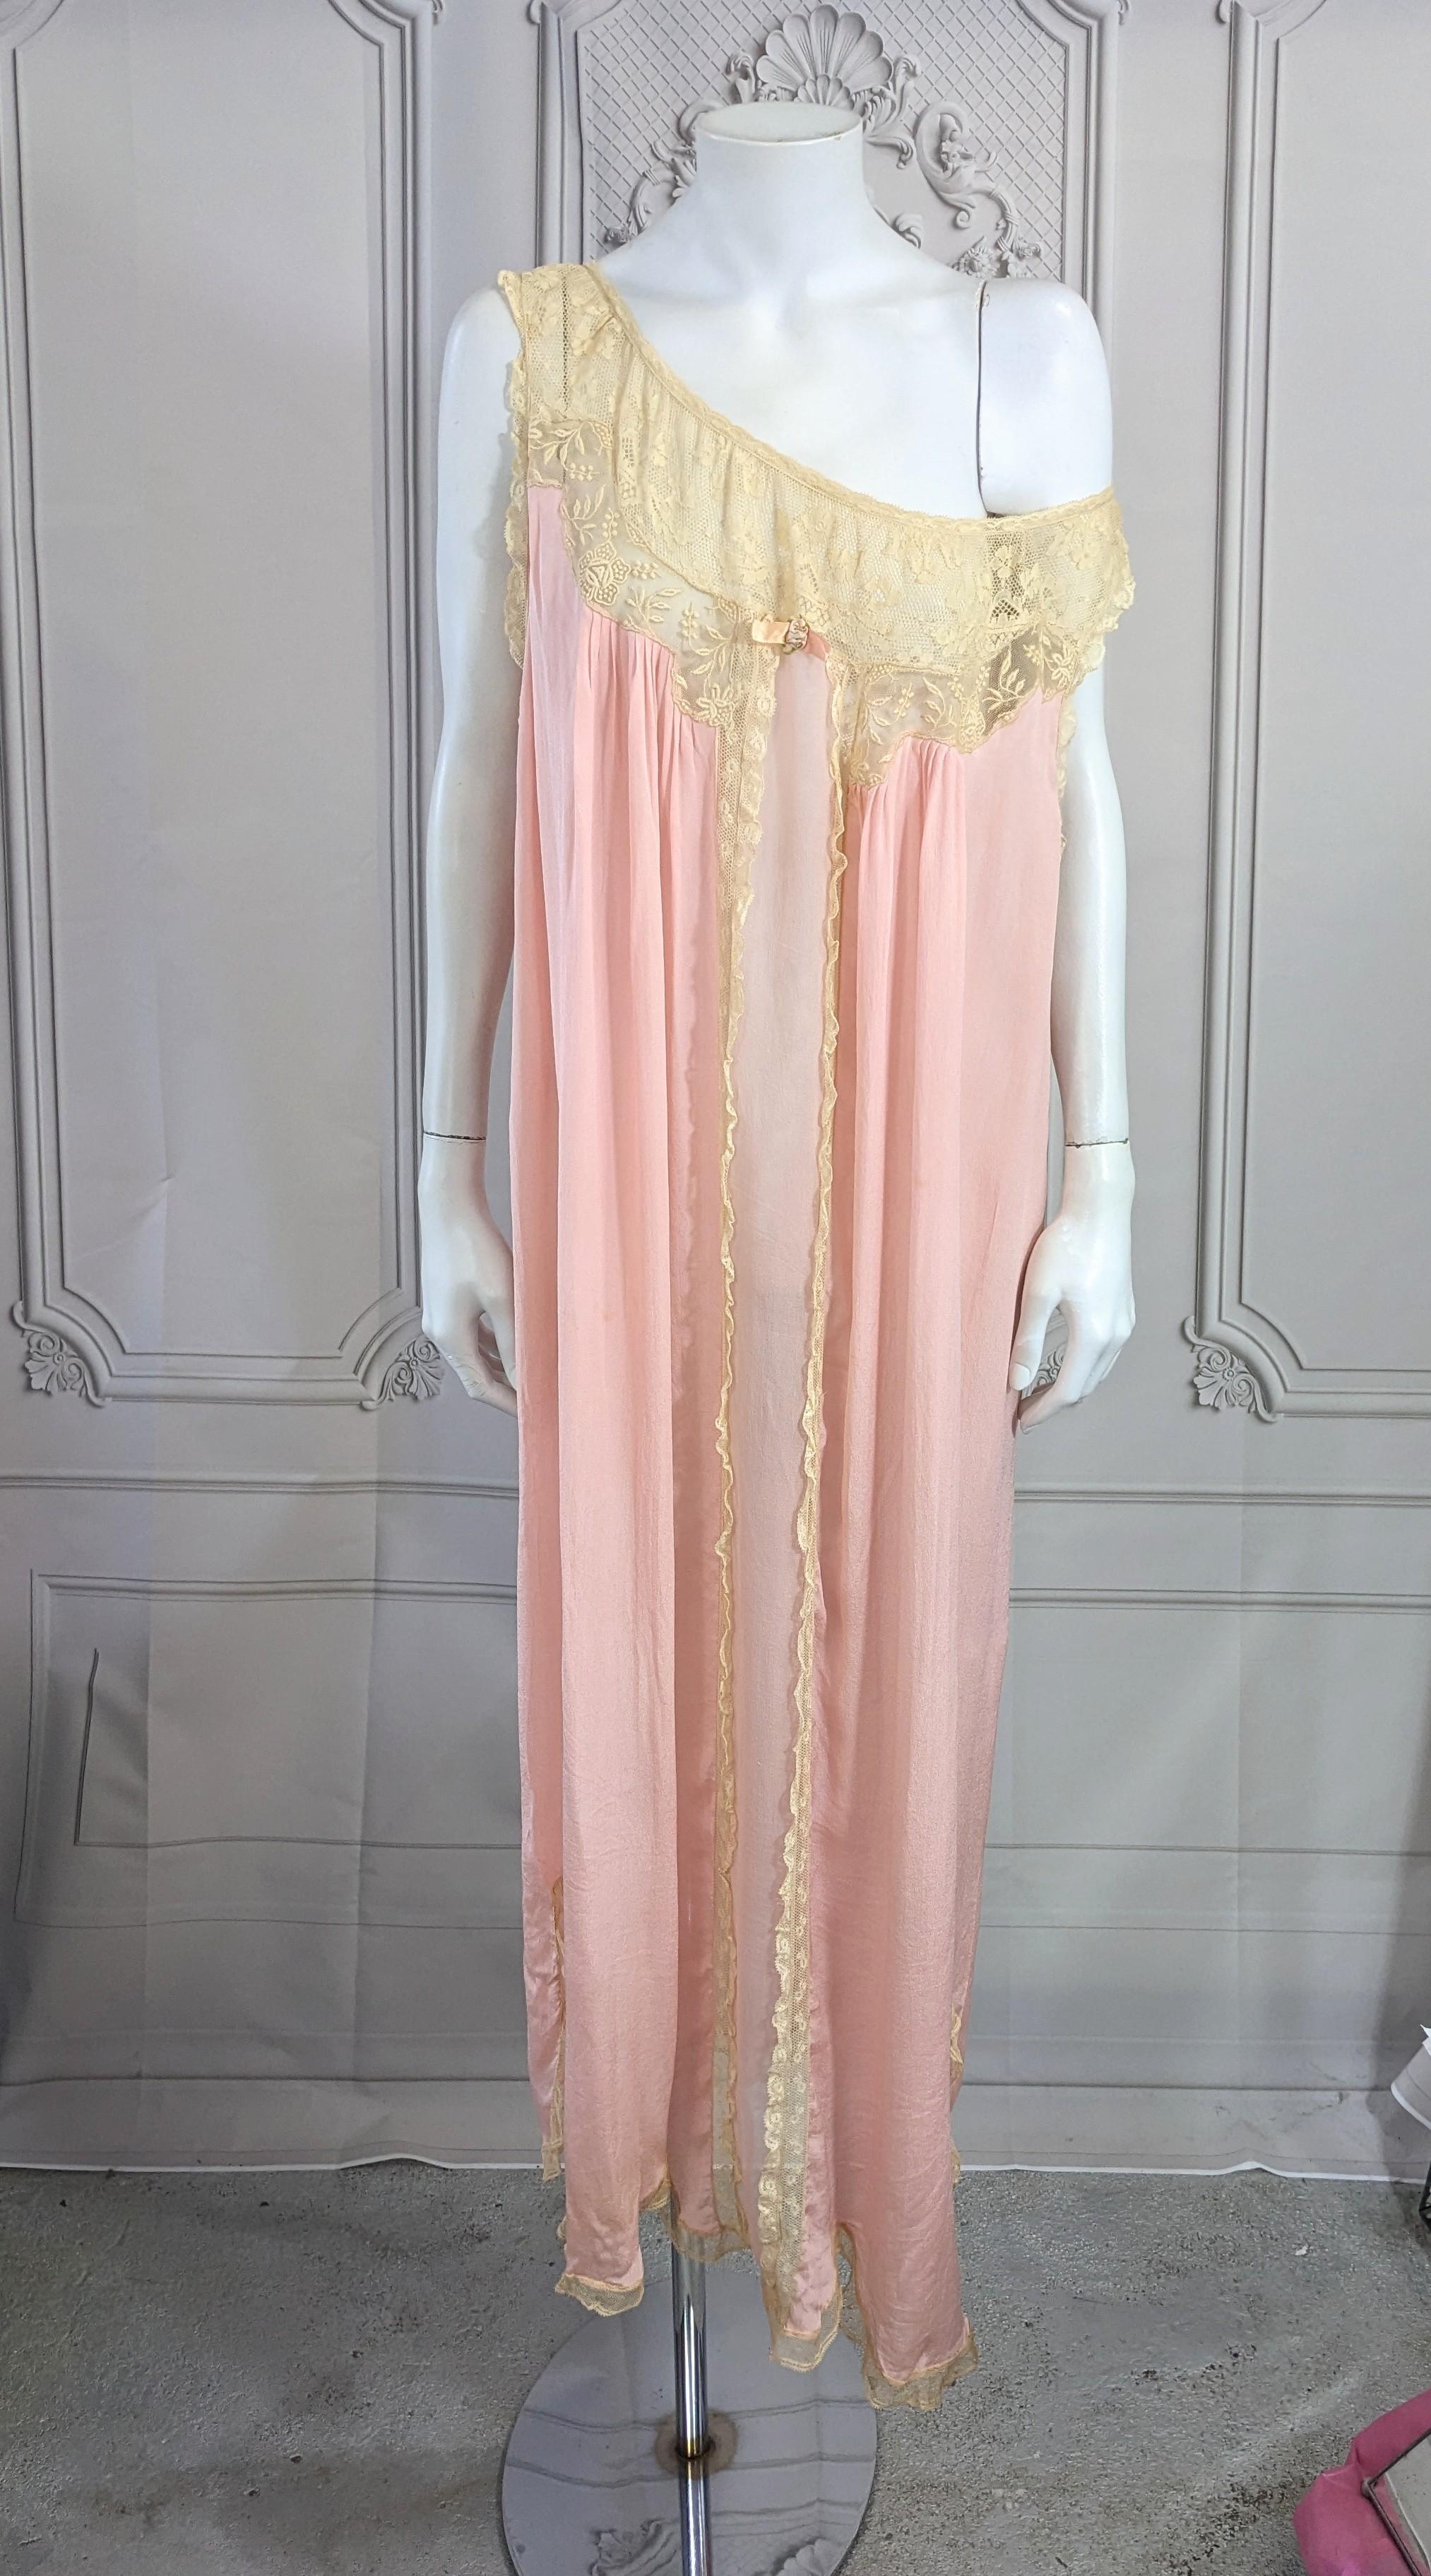 Women's Silk Crepe, Chiffon and Lace Gown, I. Magnin